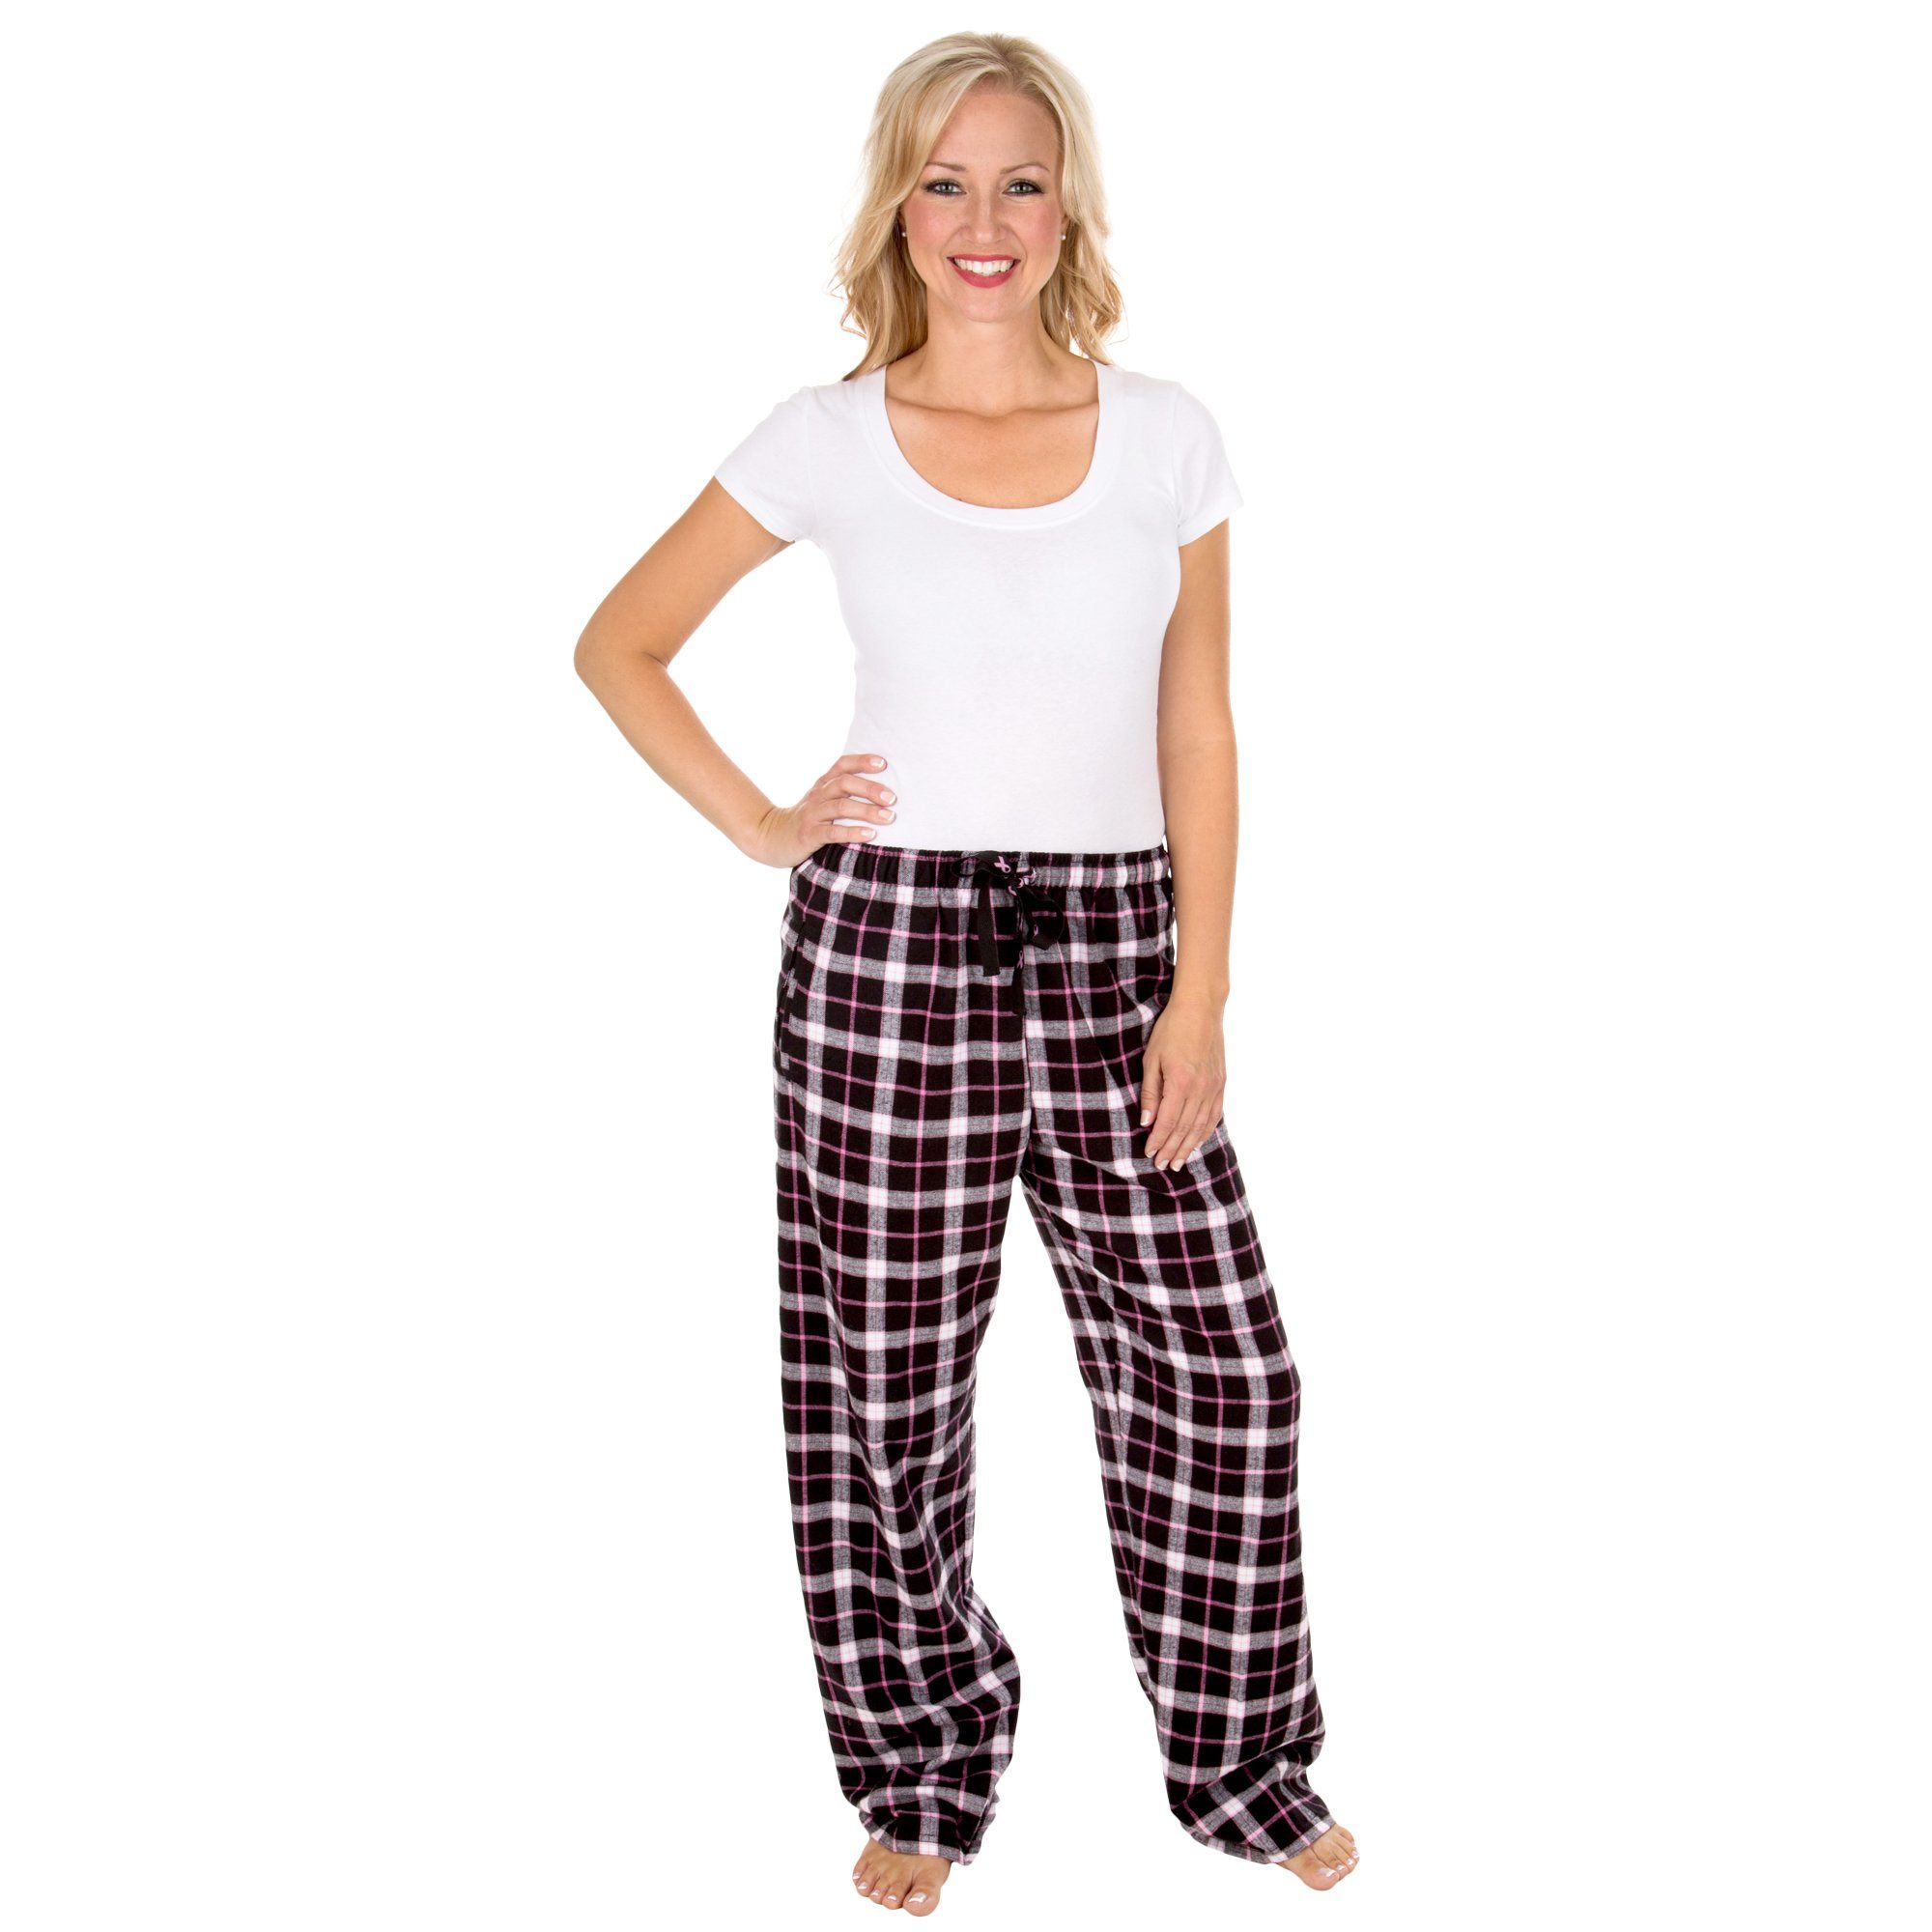 Pink Ribbon Plaid Flannel Lounge Pants – The Breast Cancer Site